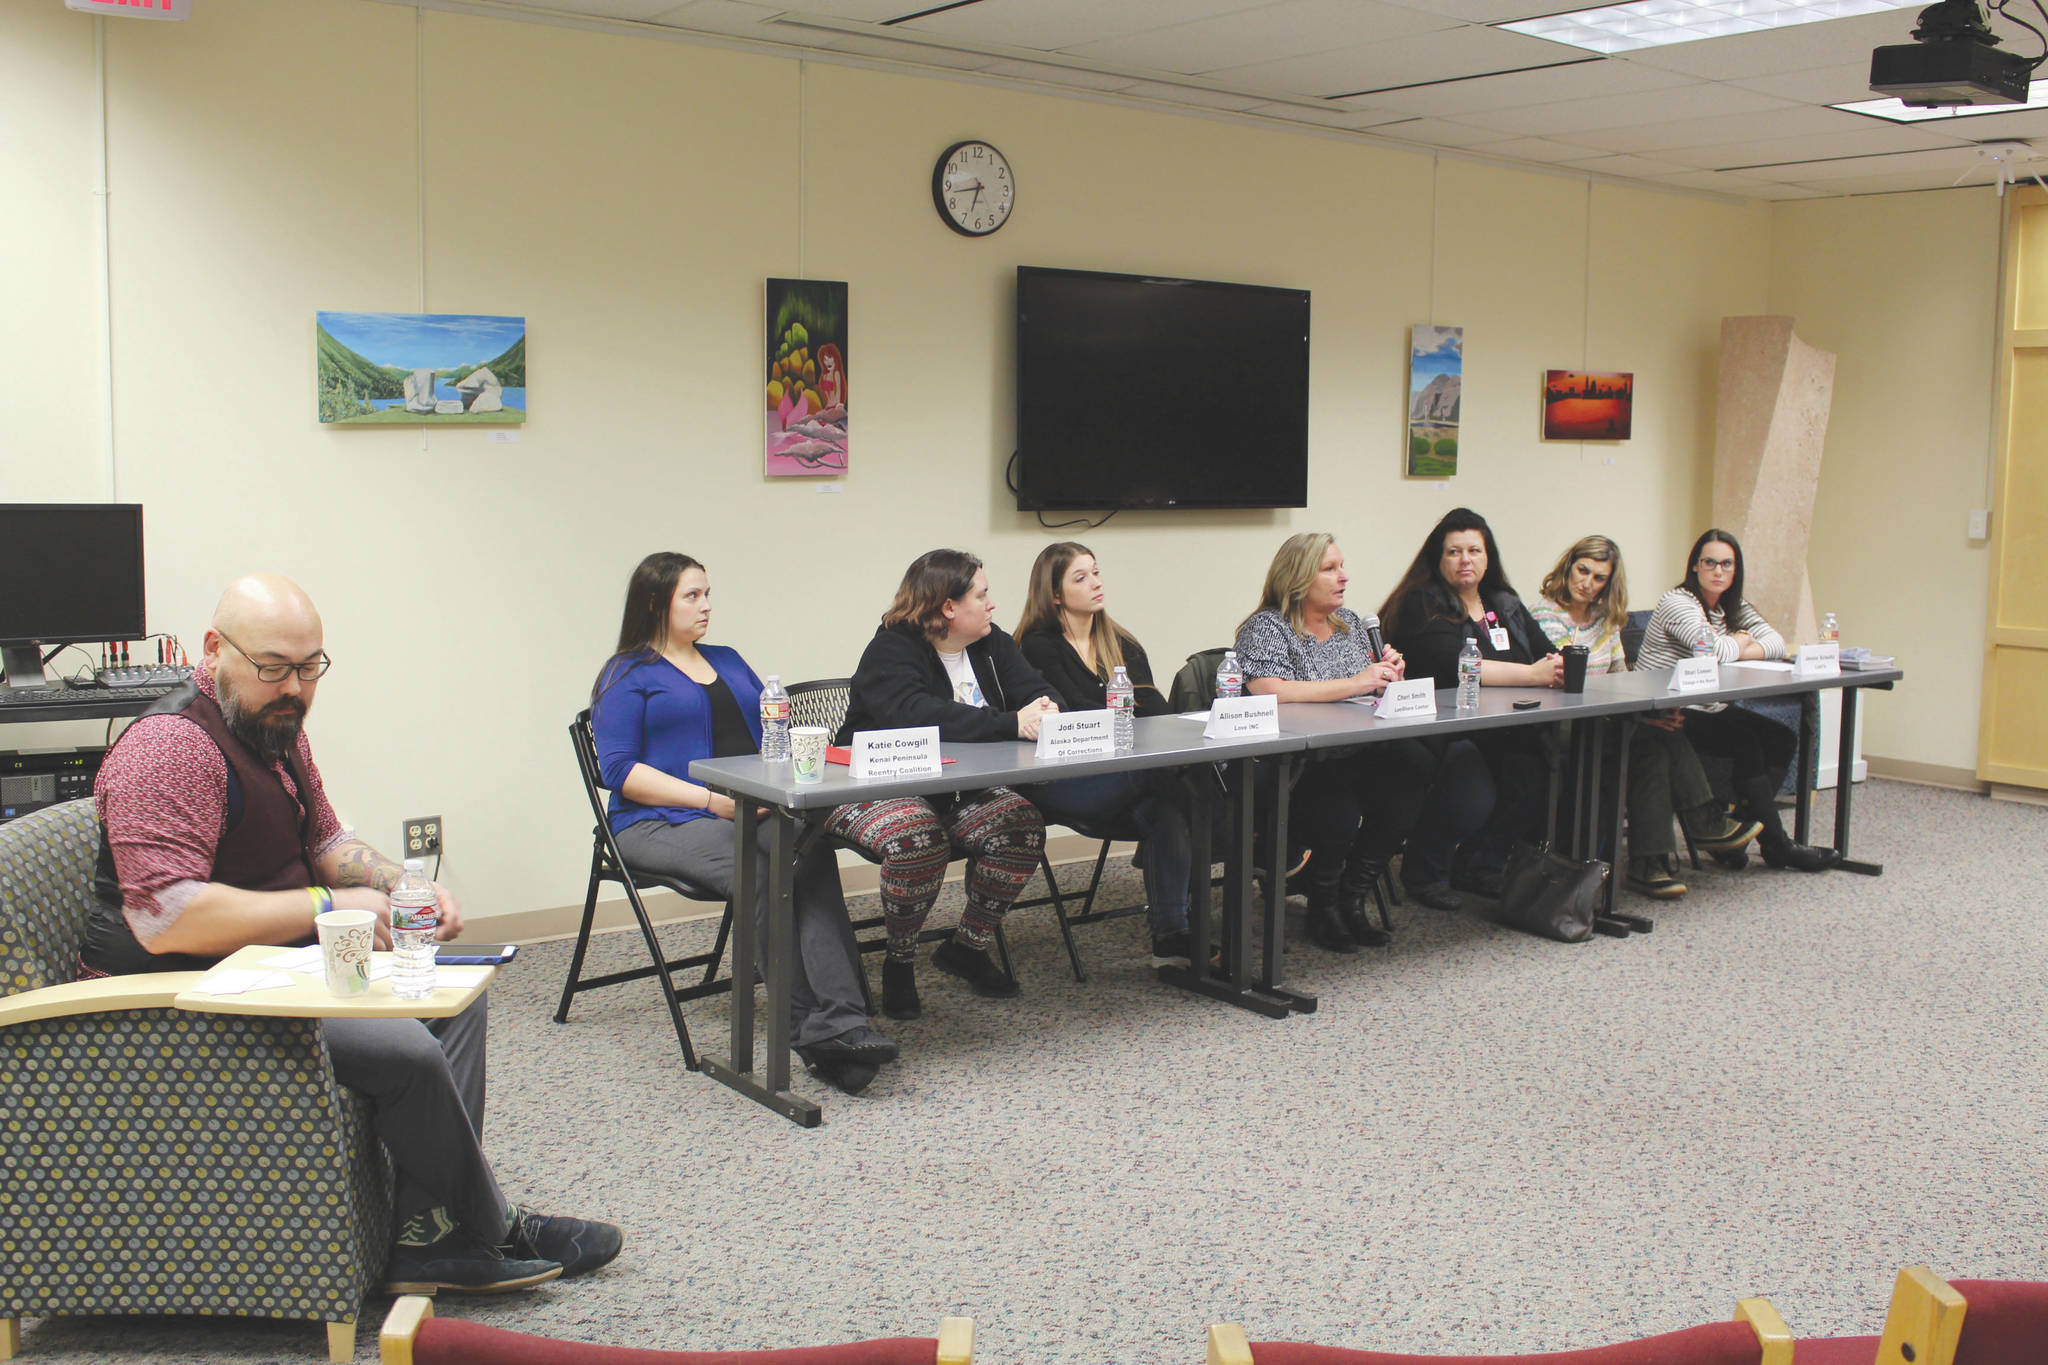 Representatives from local nonprofits and government agencies participate in a community panel on Restorative Reentry at the Kenai Peninsula College on Thursday. (Photo by Brian Mazurek)